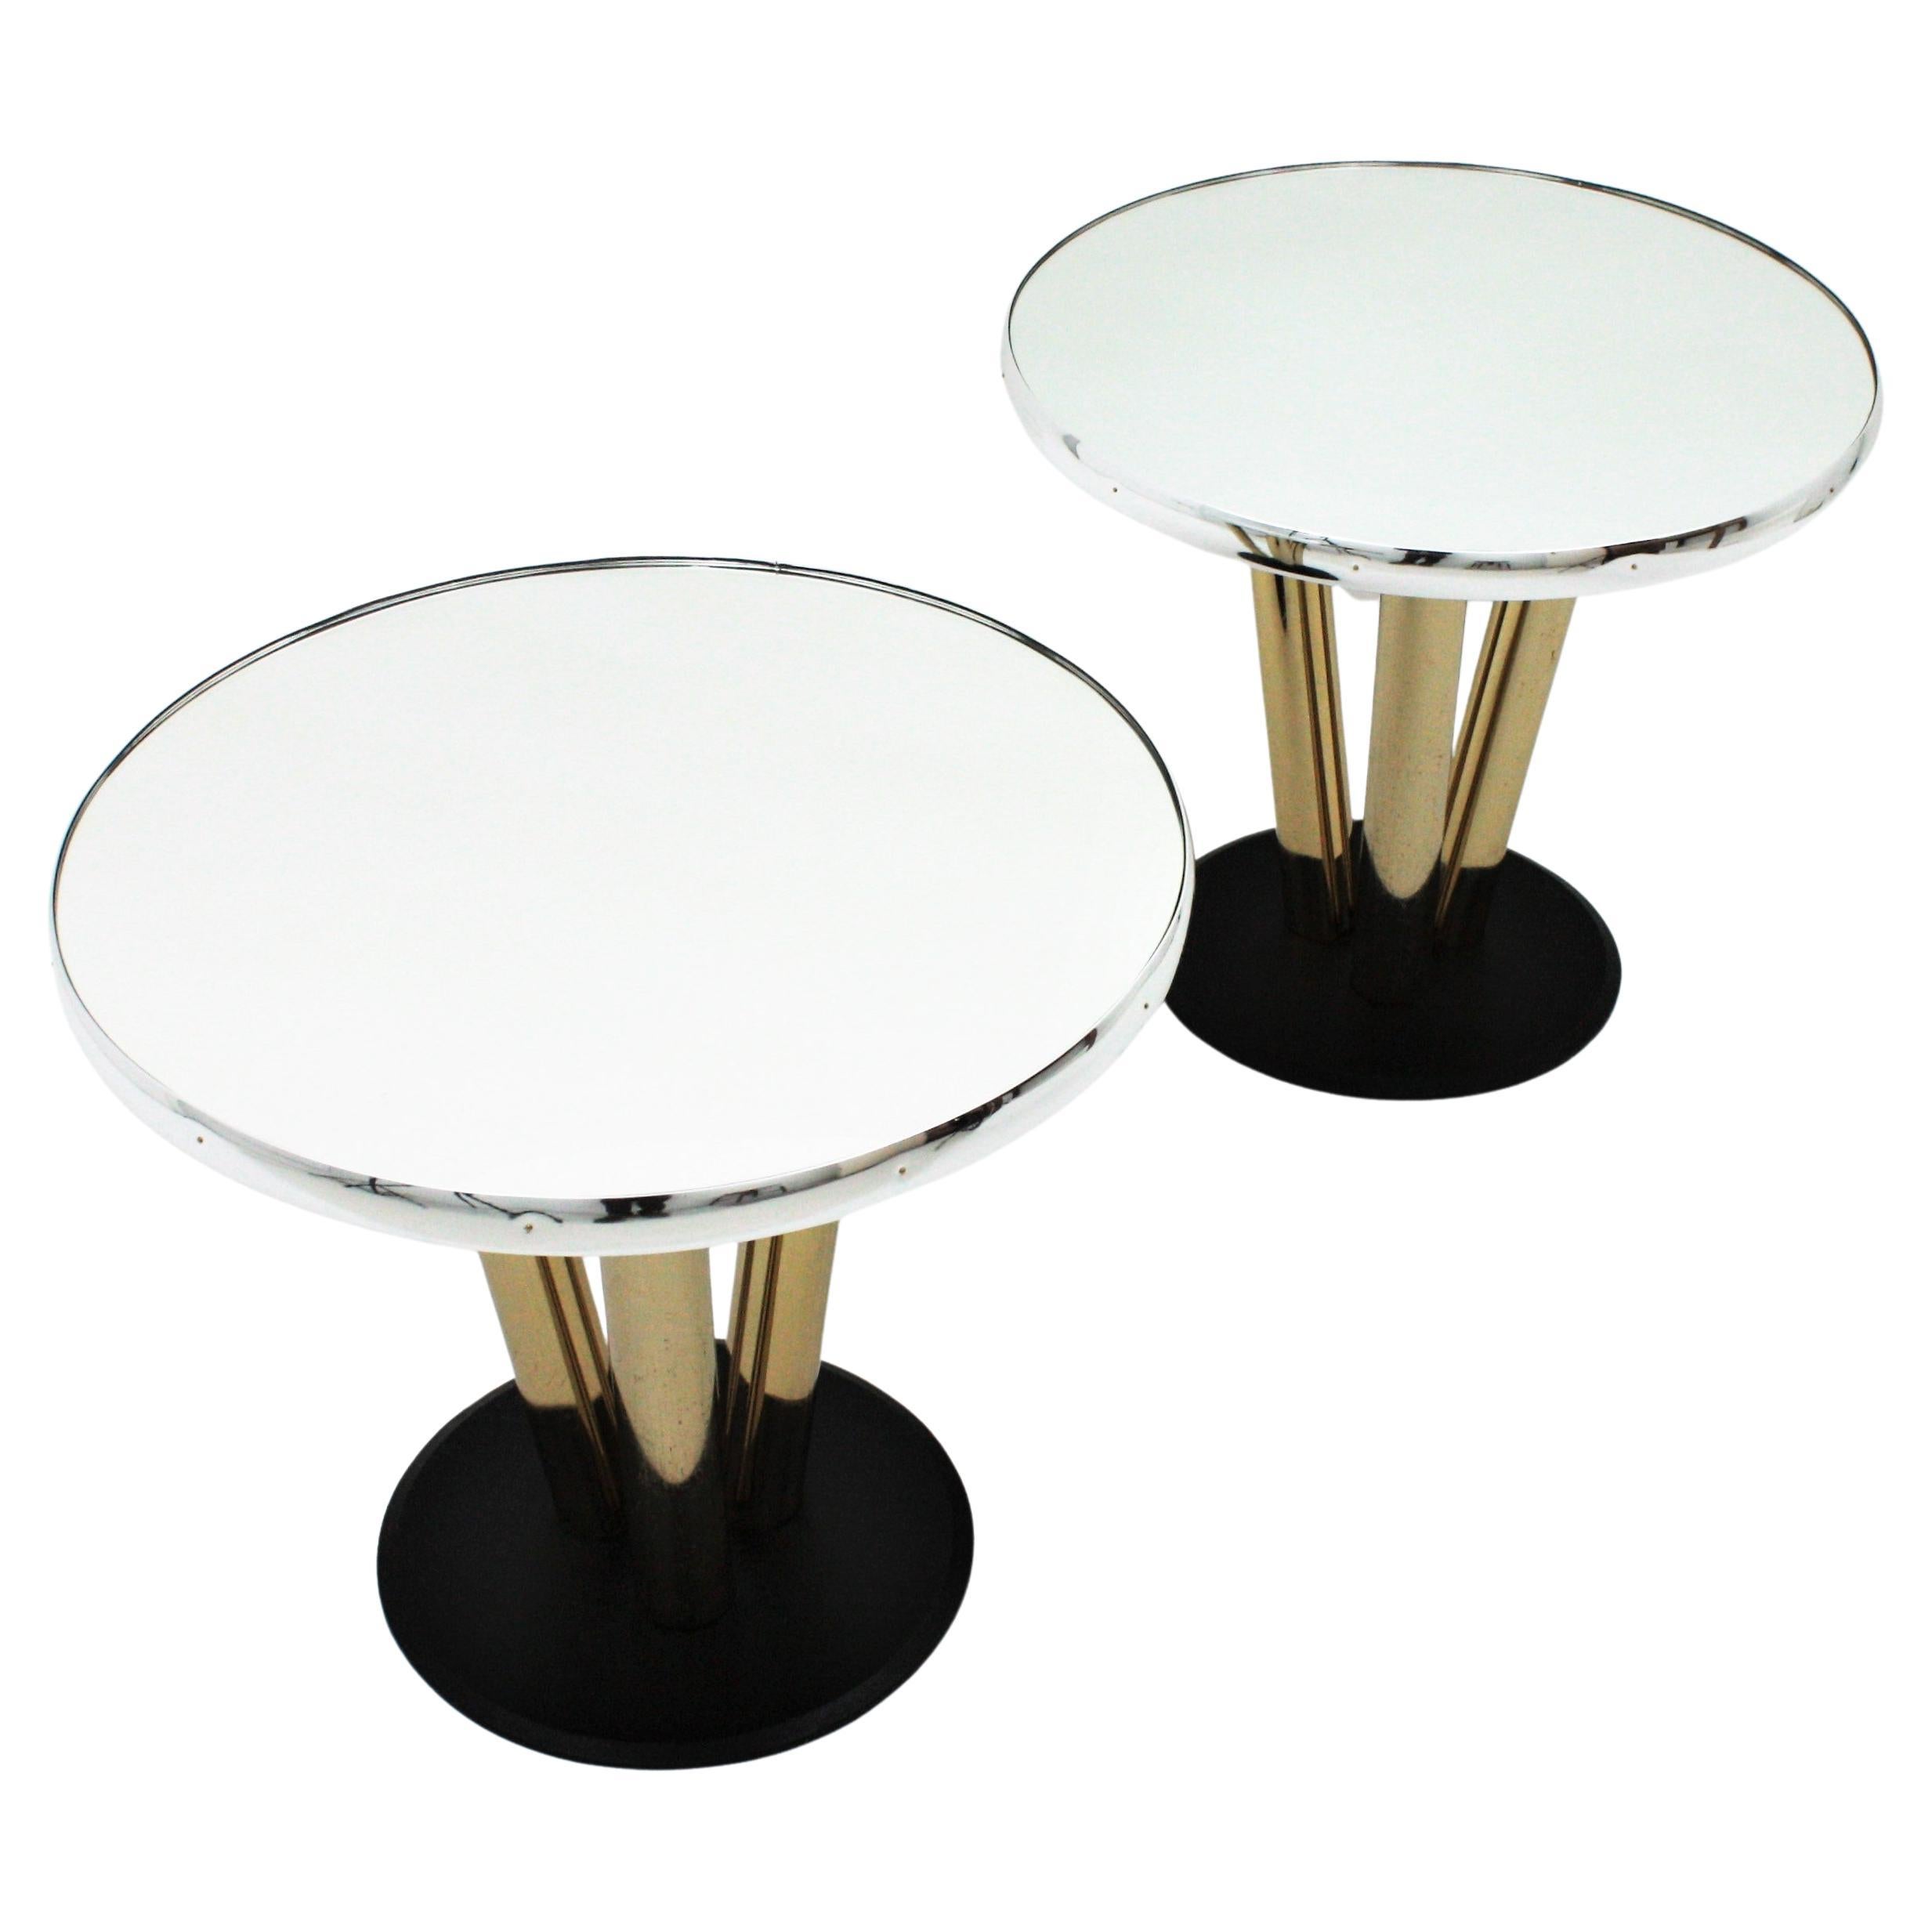 Pair of Round Side Tables in Brass, Mirror and Black Lacquer For Sale